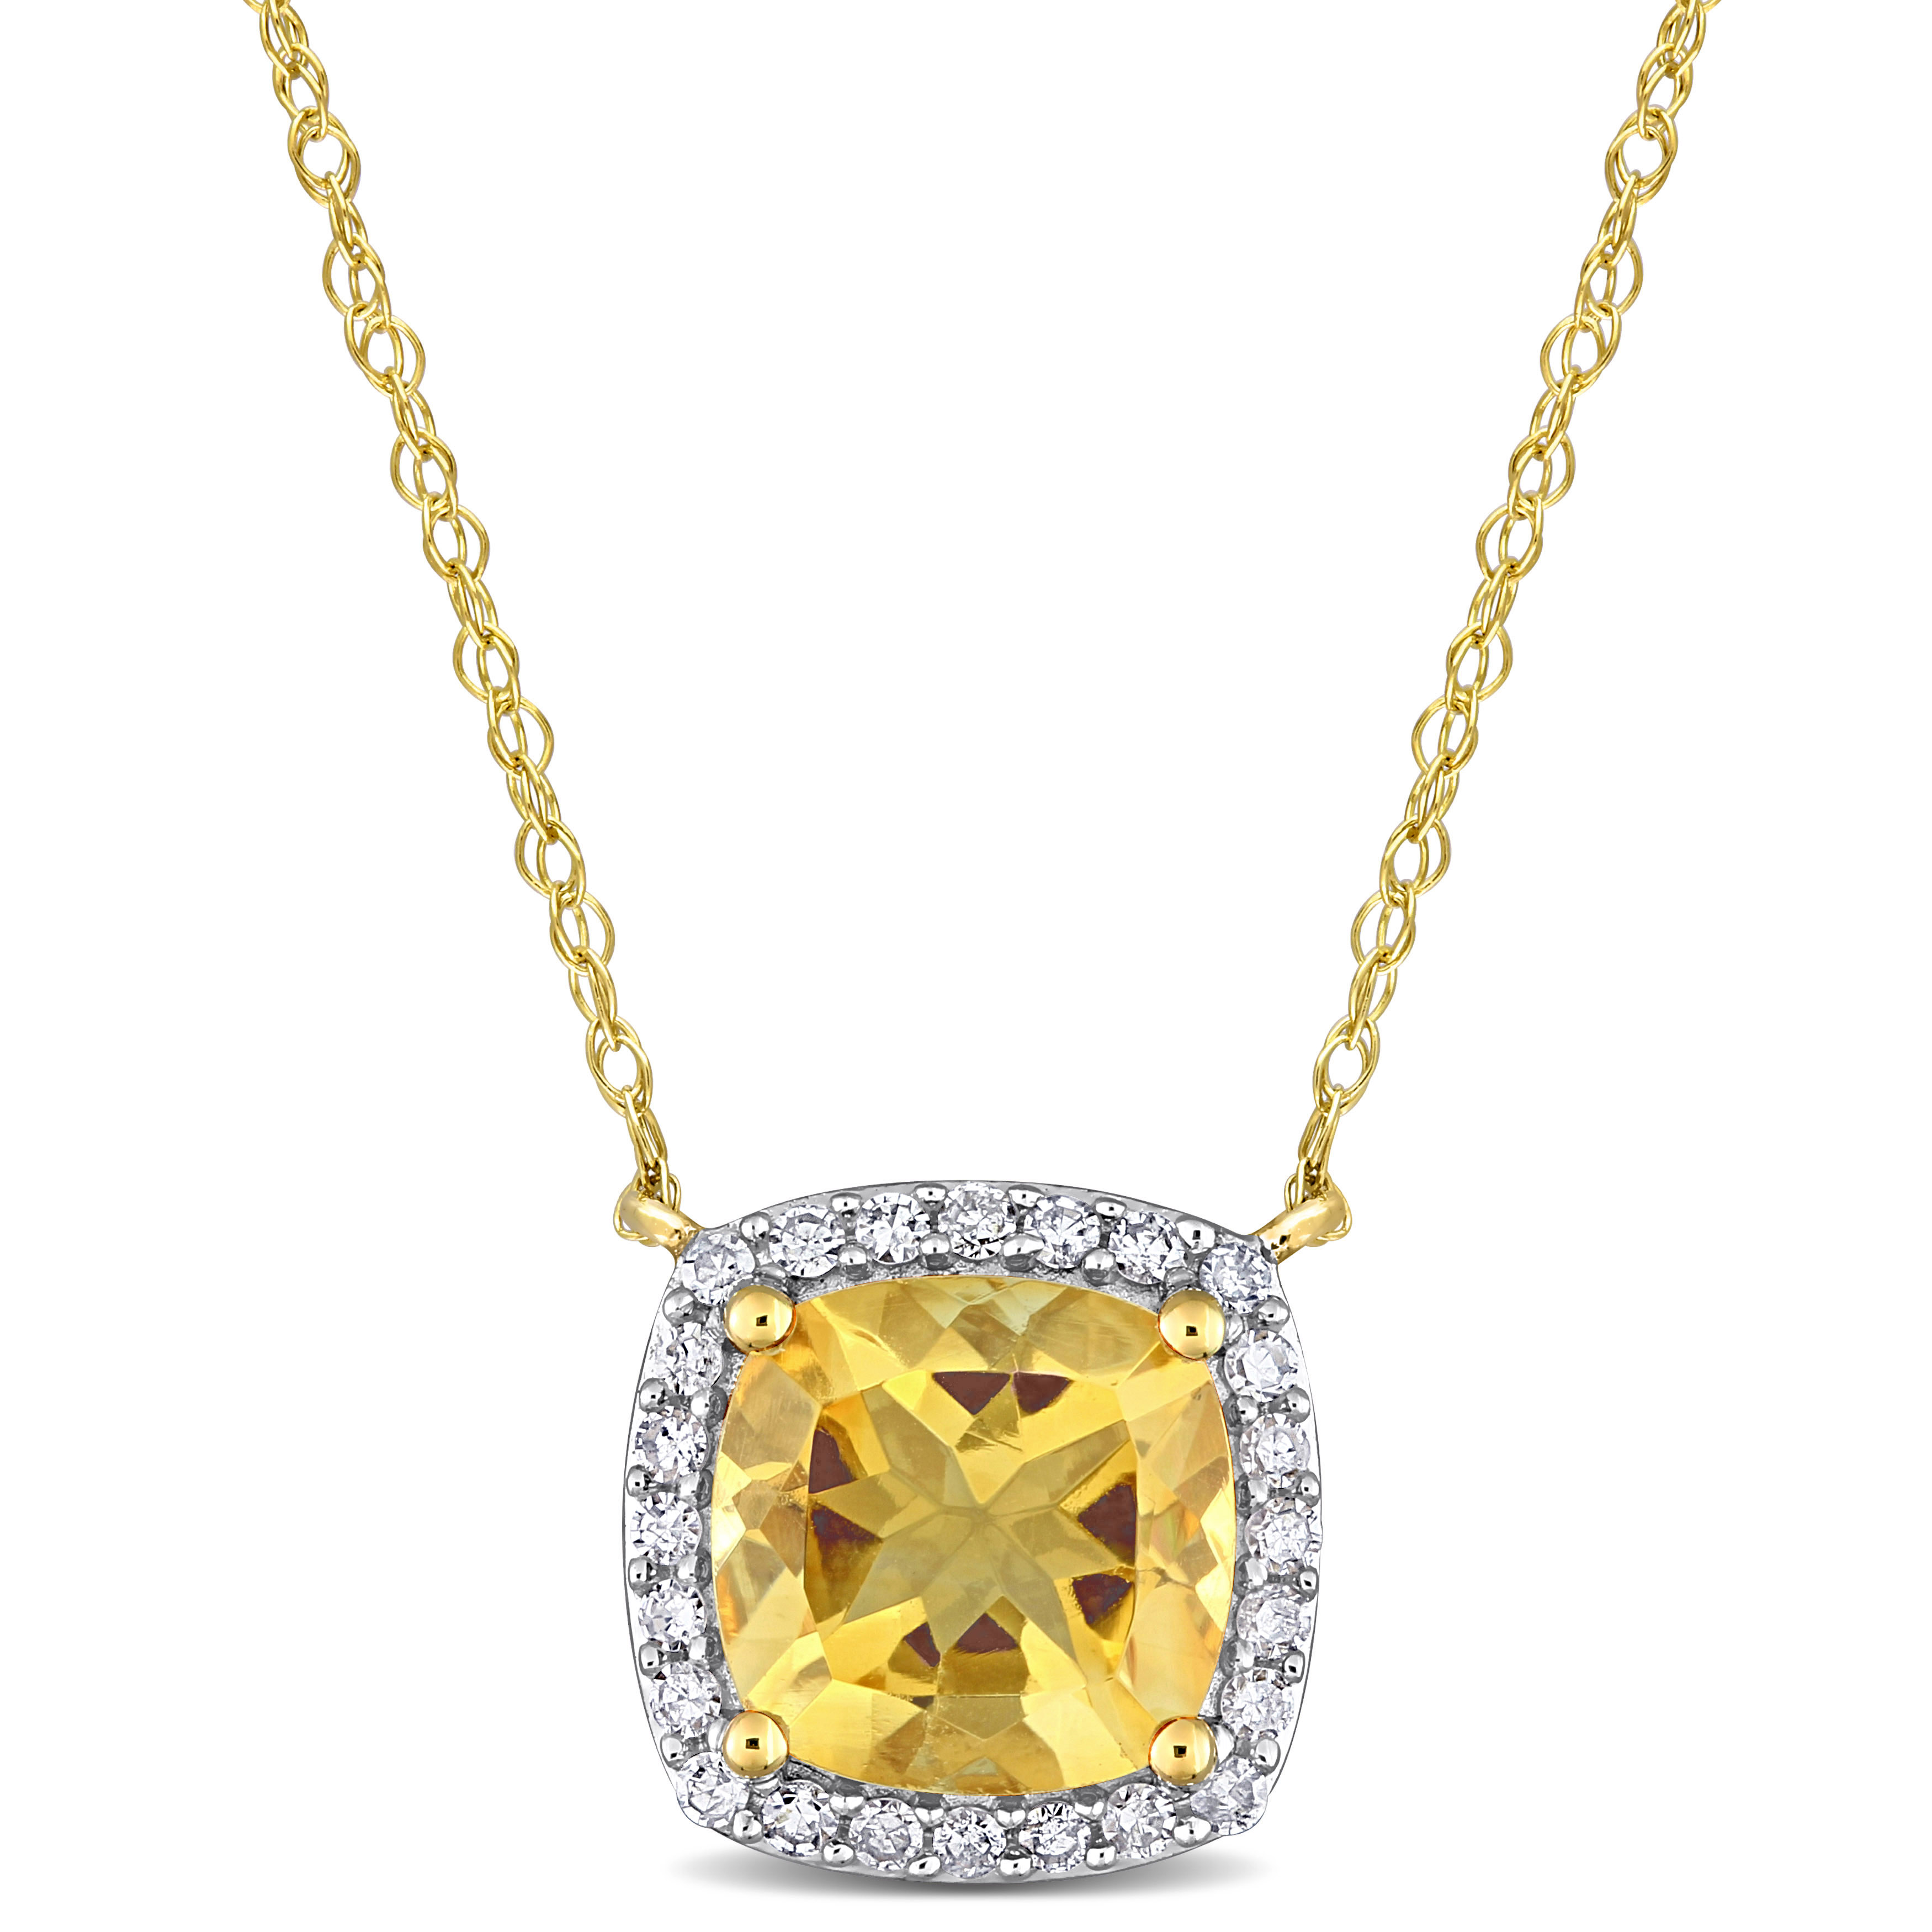 1 1/3 CT TGW Cushion Citrine and 1/8 CT TW Diamond Halo Necklace in 10k Yellow Gold - 17 in.